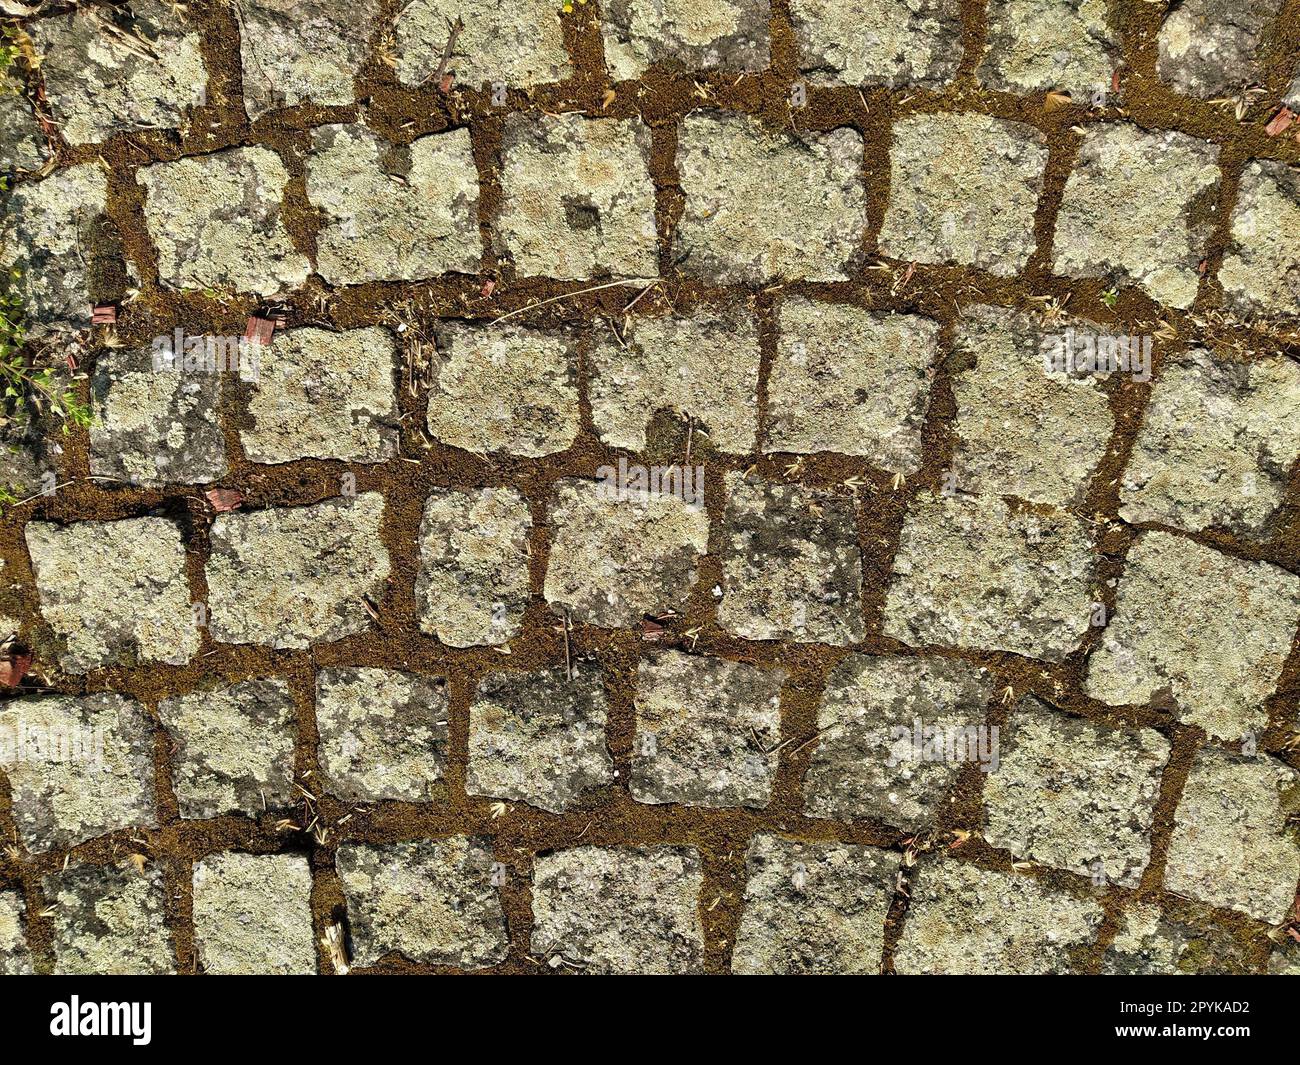 Concrete or cobble gray pavement slabs or stones for floor, wall or path. Traditional fence, court, backyard or road paving. Old square cobblestones overgrown with grass and moss Stock Photo